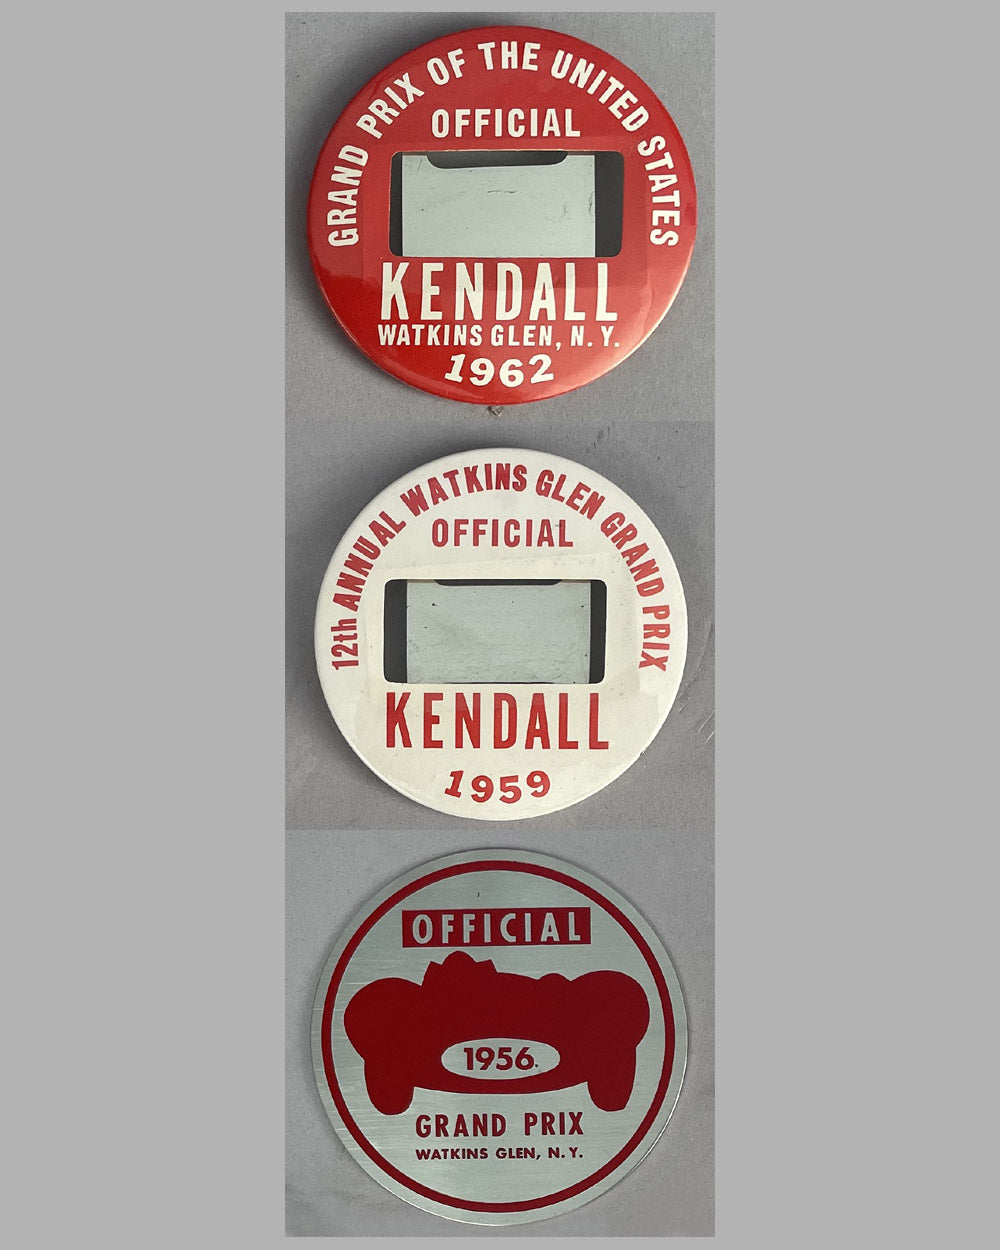 Three buttons / passes for officials at the Grand Prix of the United States in Watkins Glen